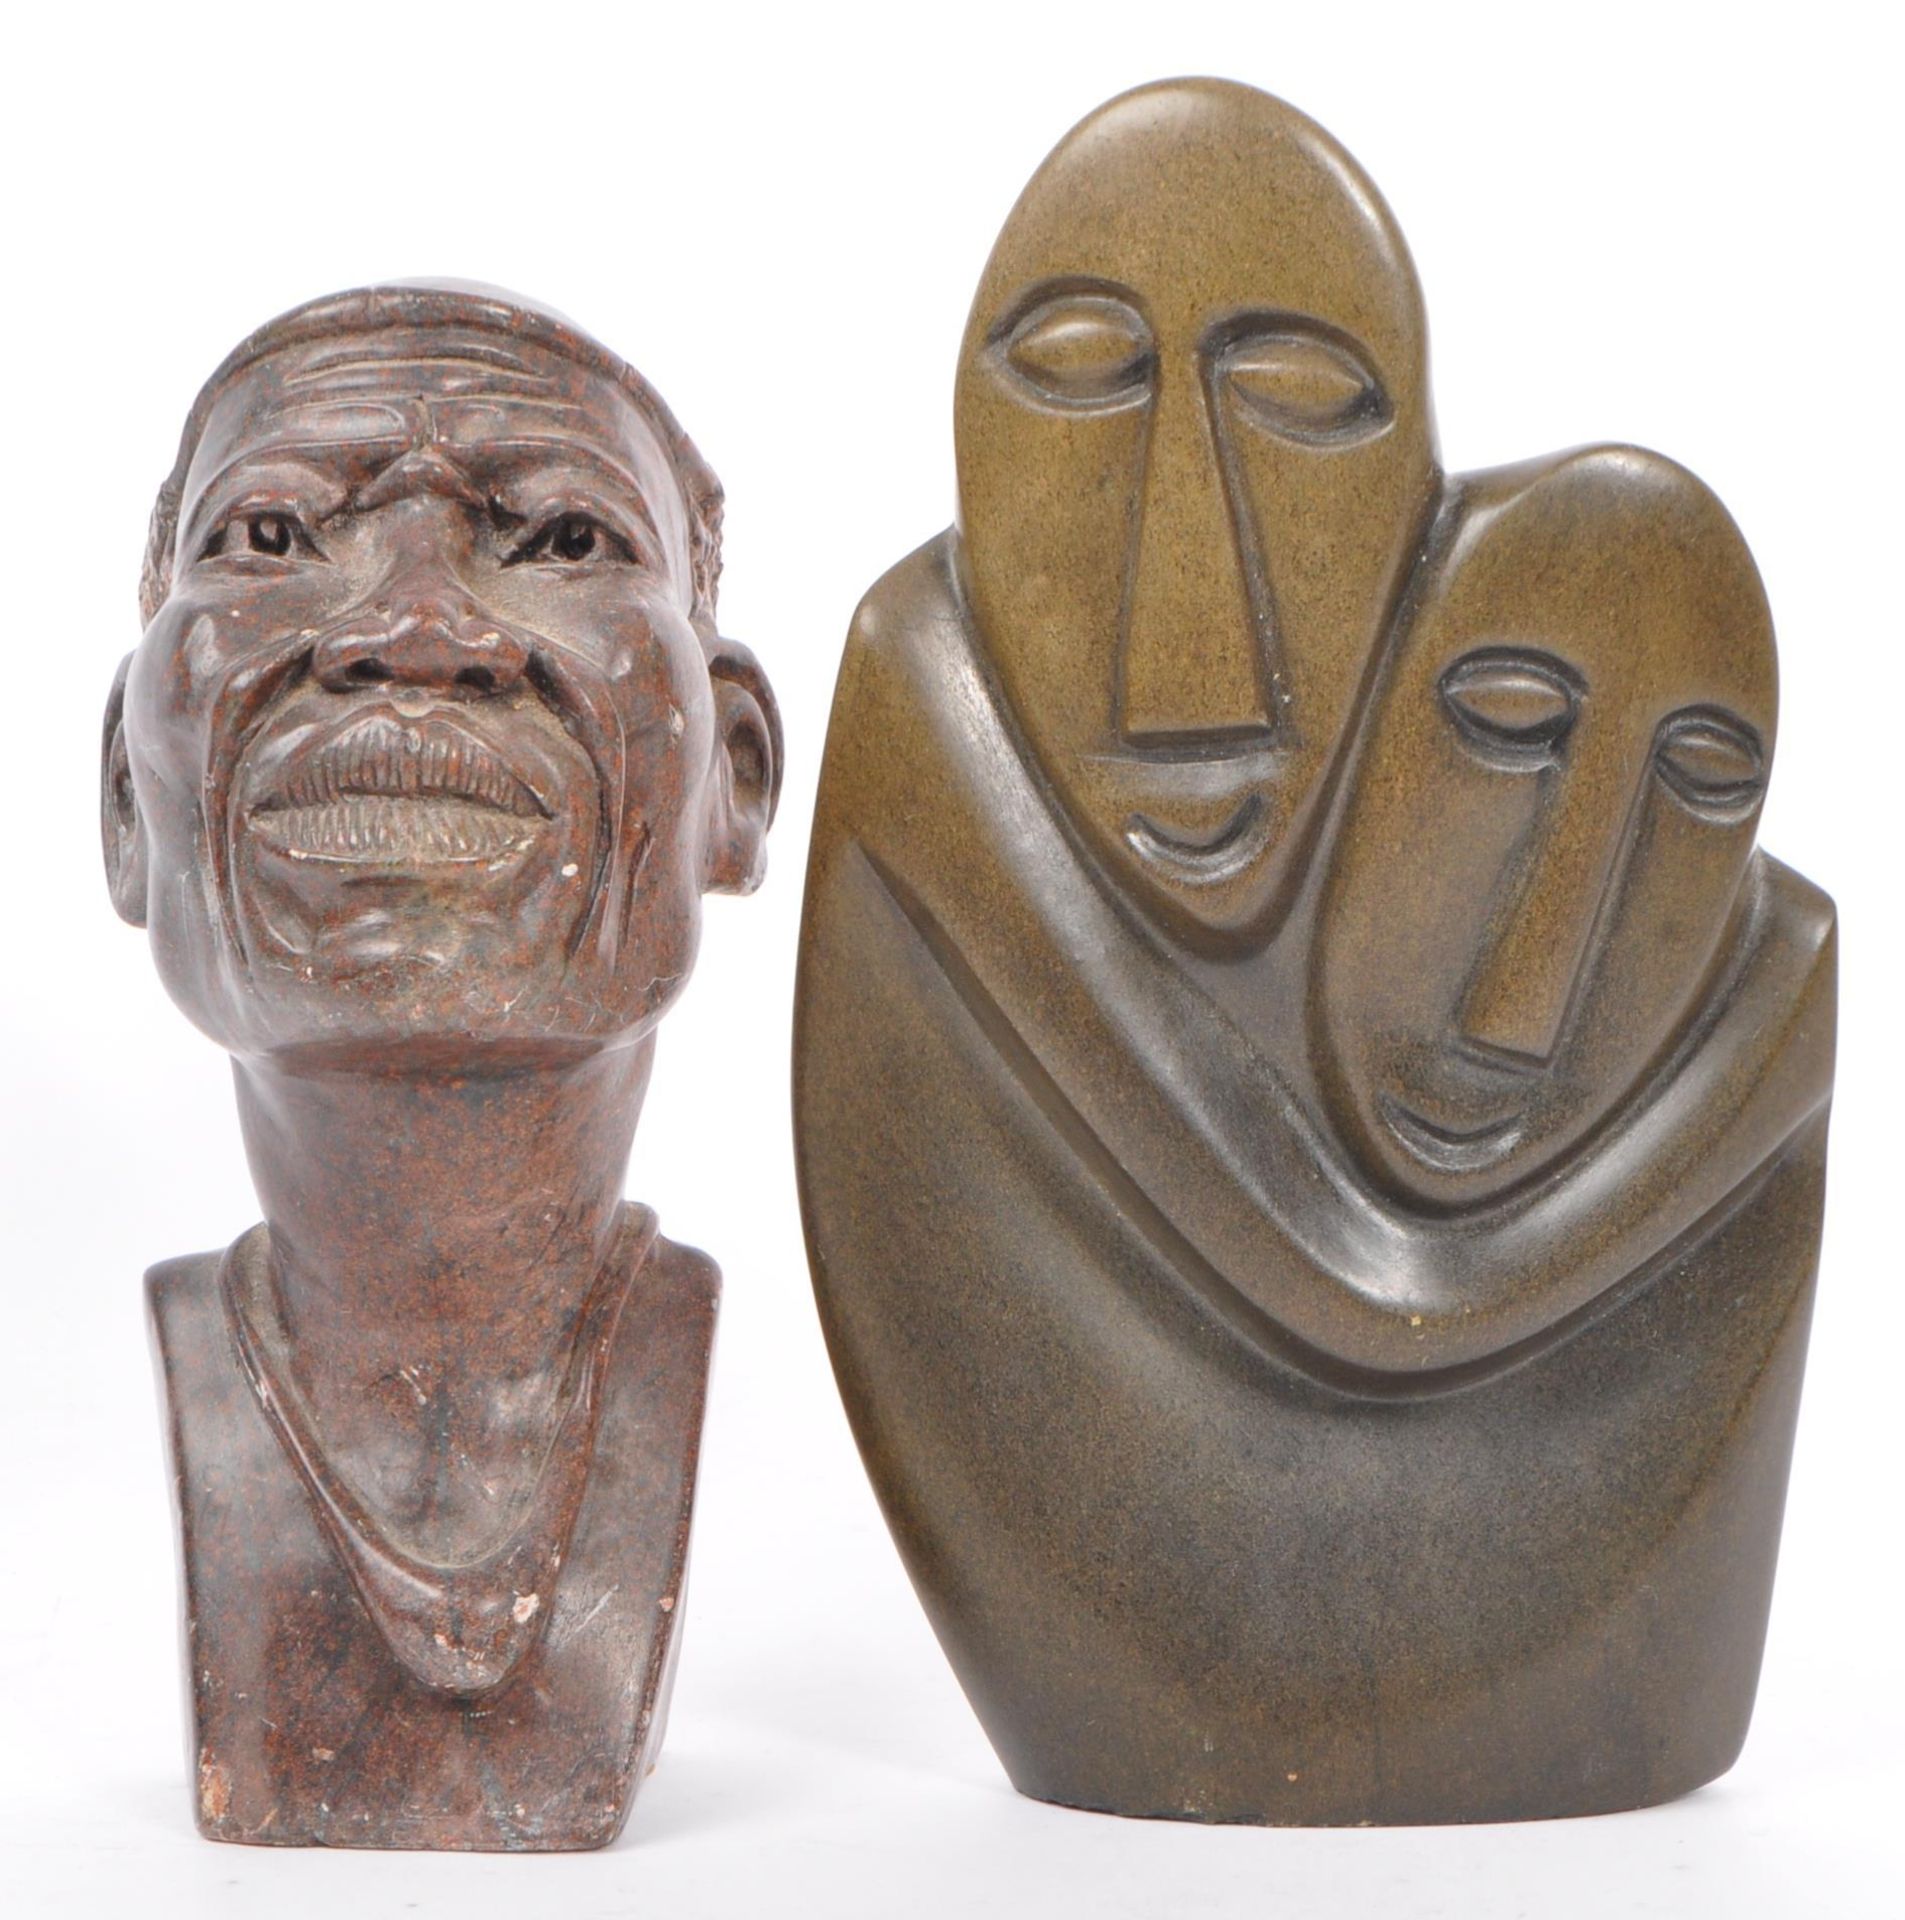 VINTAGE 20TH CENTURY AFRICAN STONE CARVING FIGURES